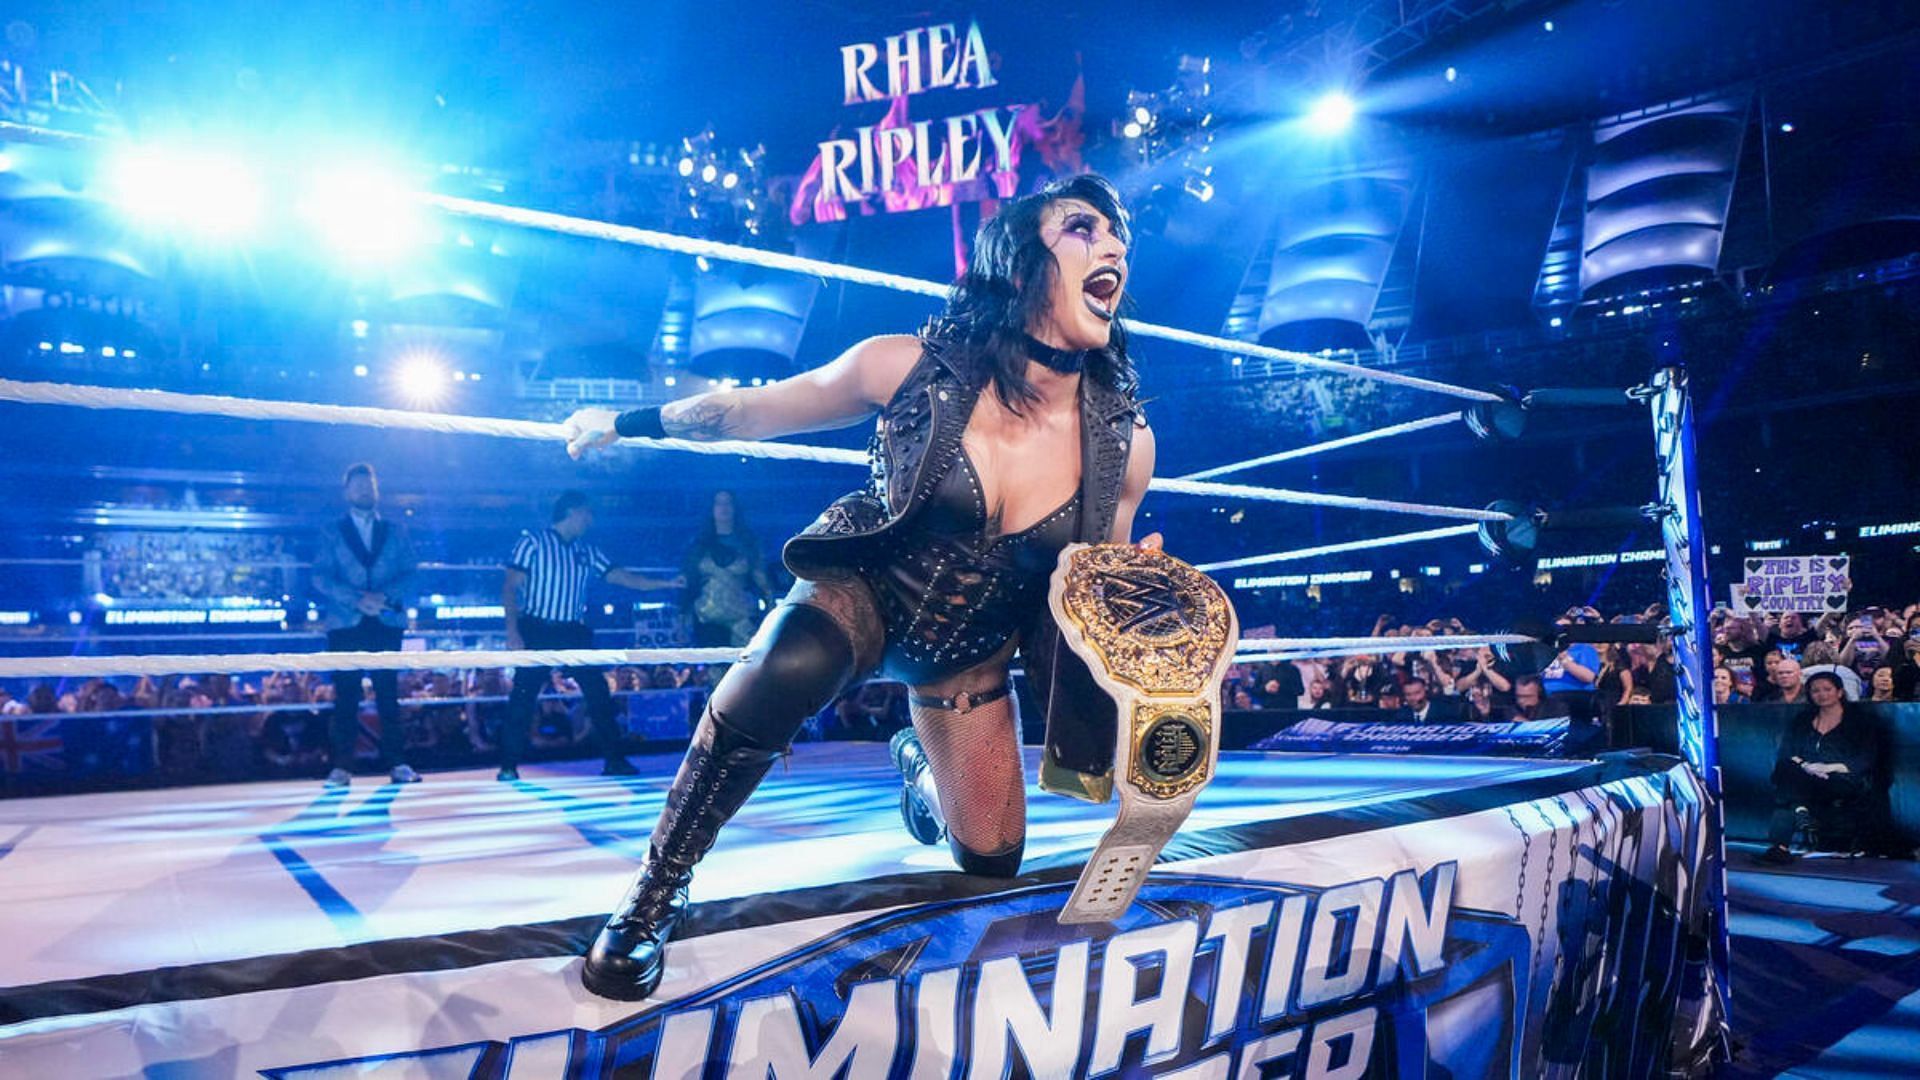 Rhea Ripley successfully defended her title against Nia Jax